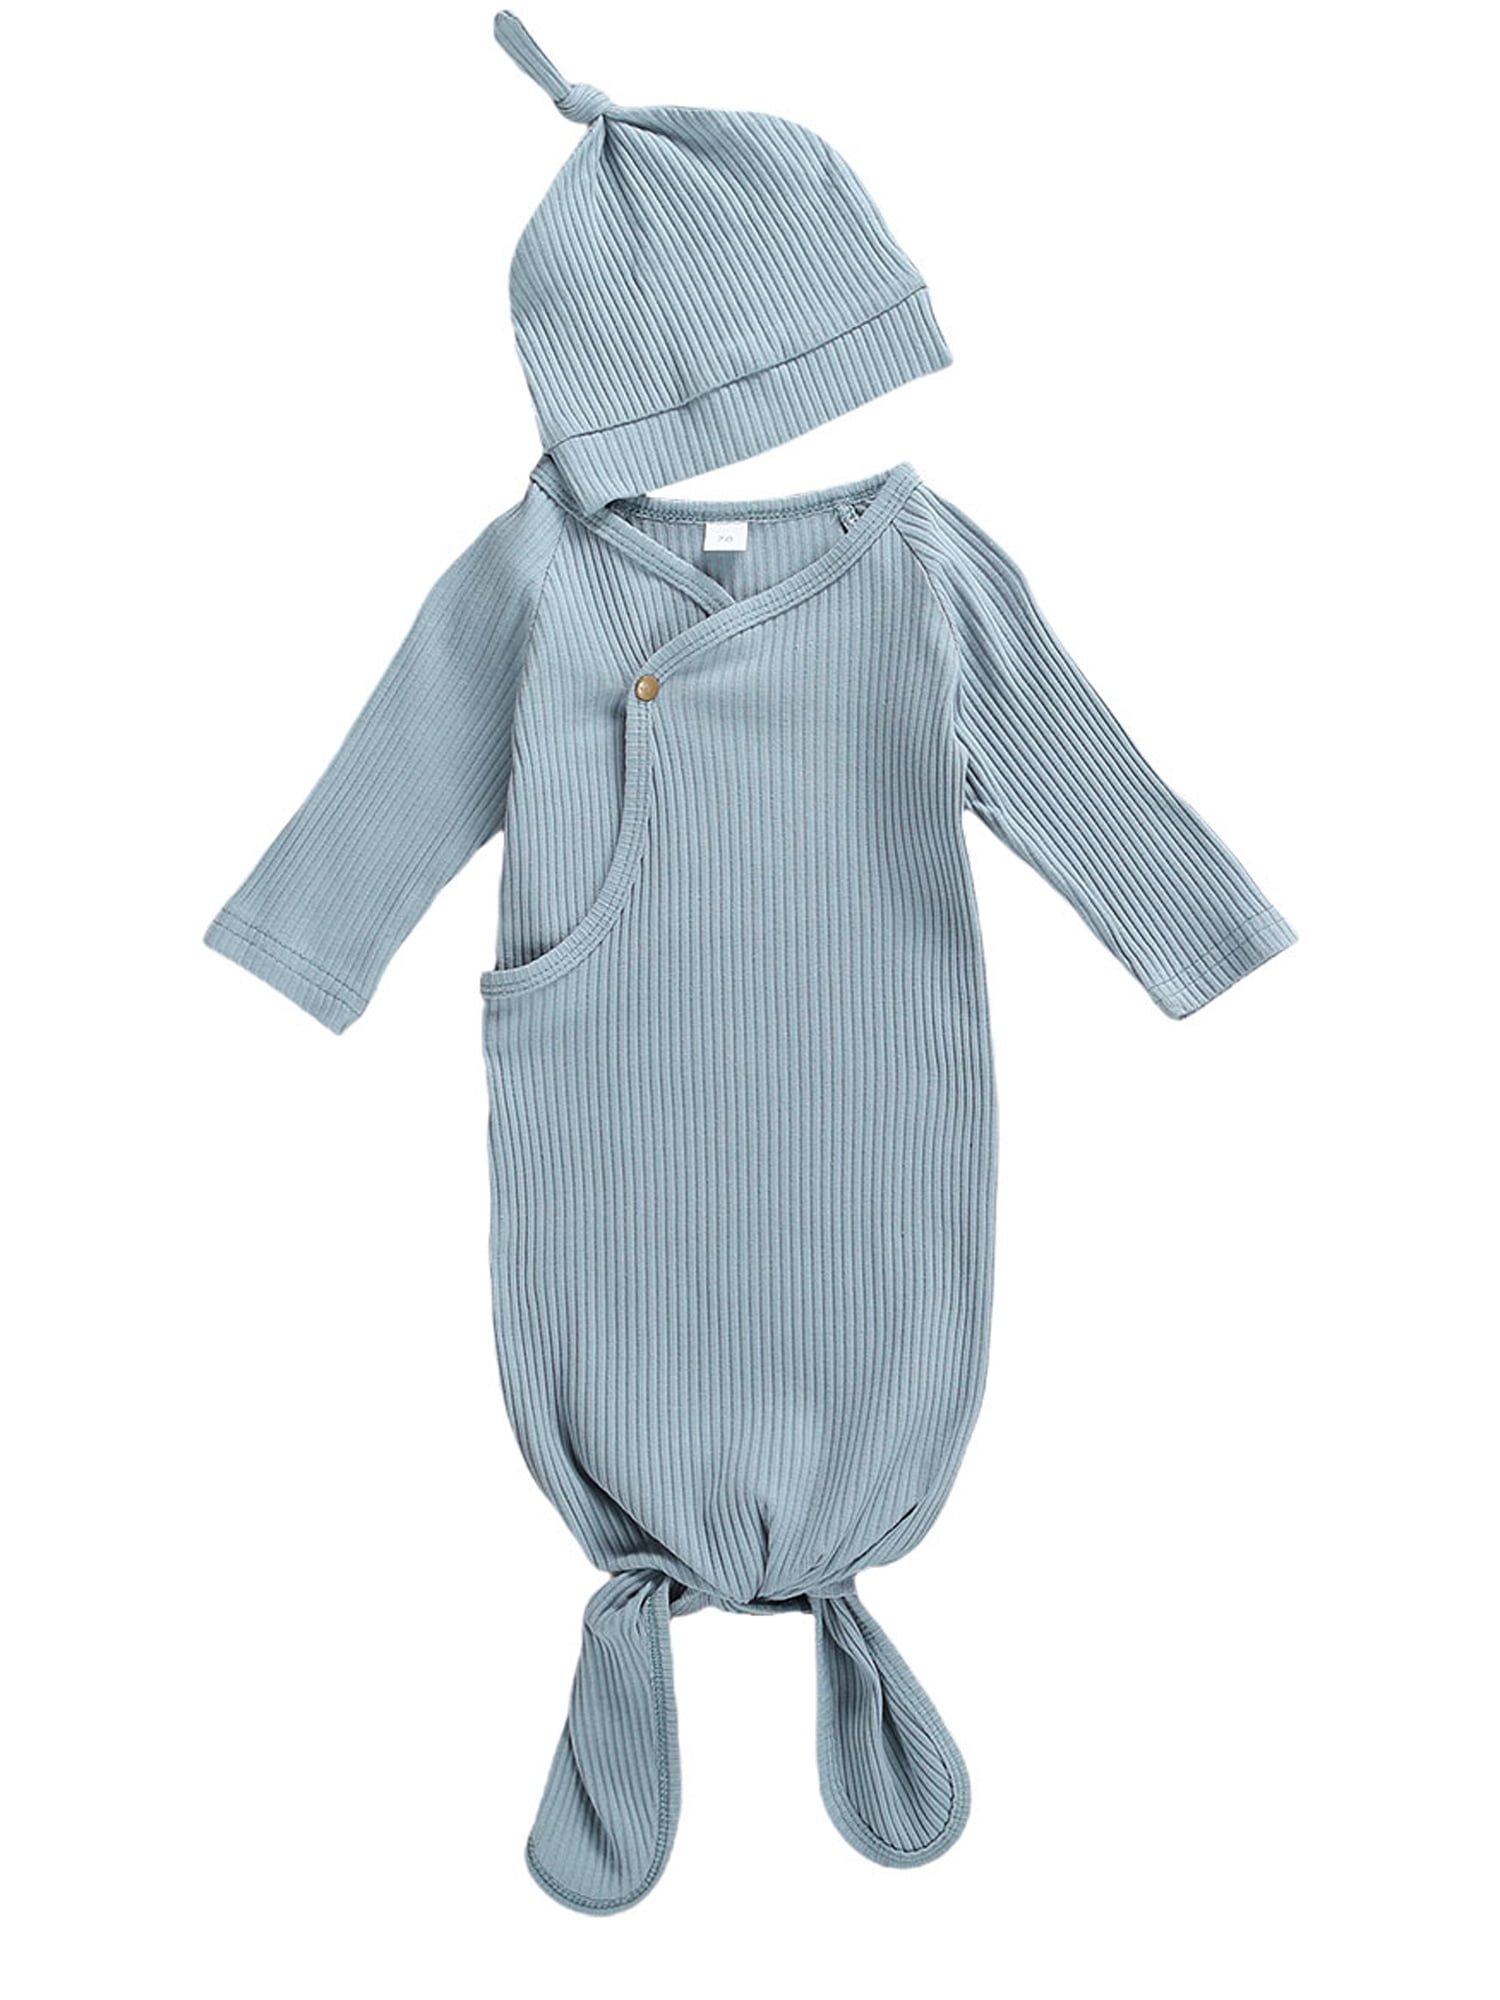 Newborn Baby Boys Girls Knotted Nightgown Long Sleeve Swaddle Blanket with Hat Set Coming Home Outfit